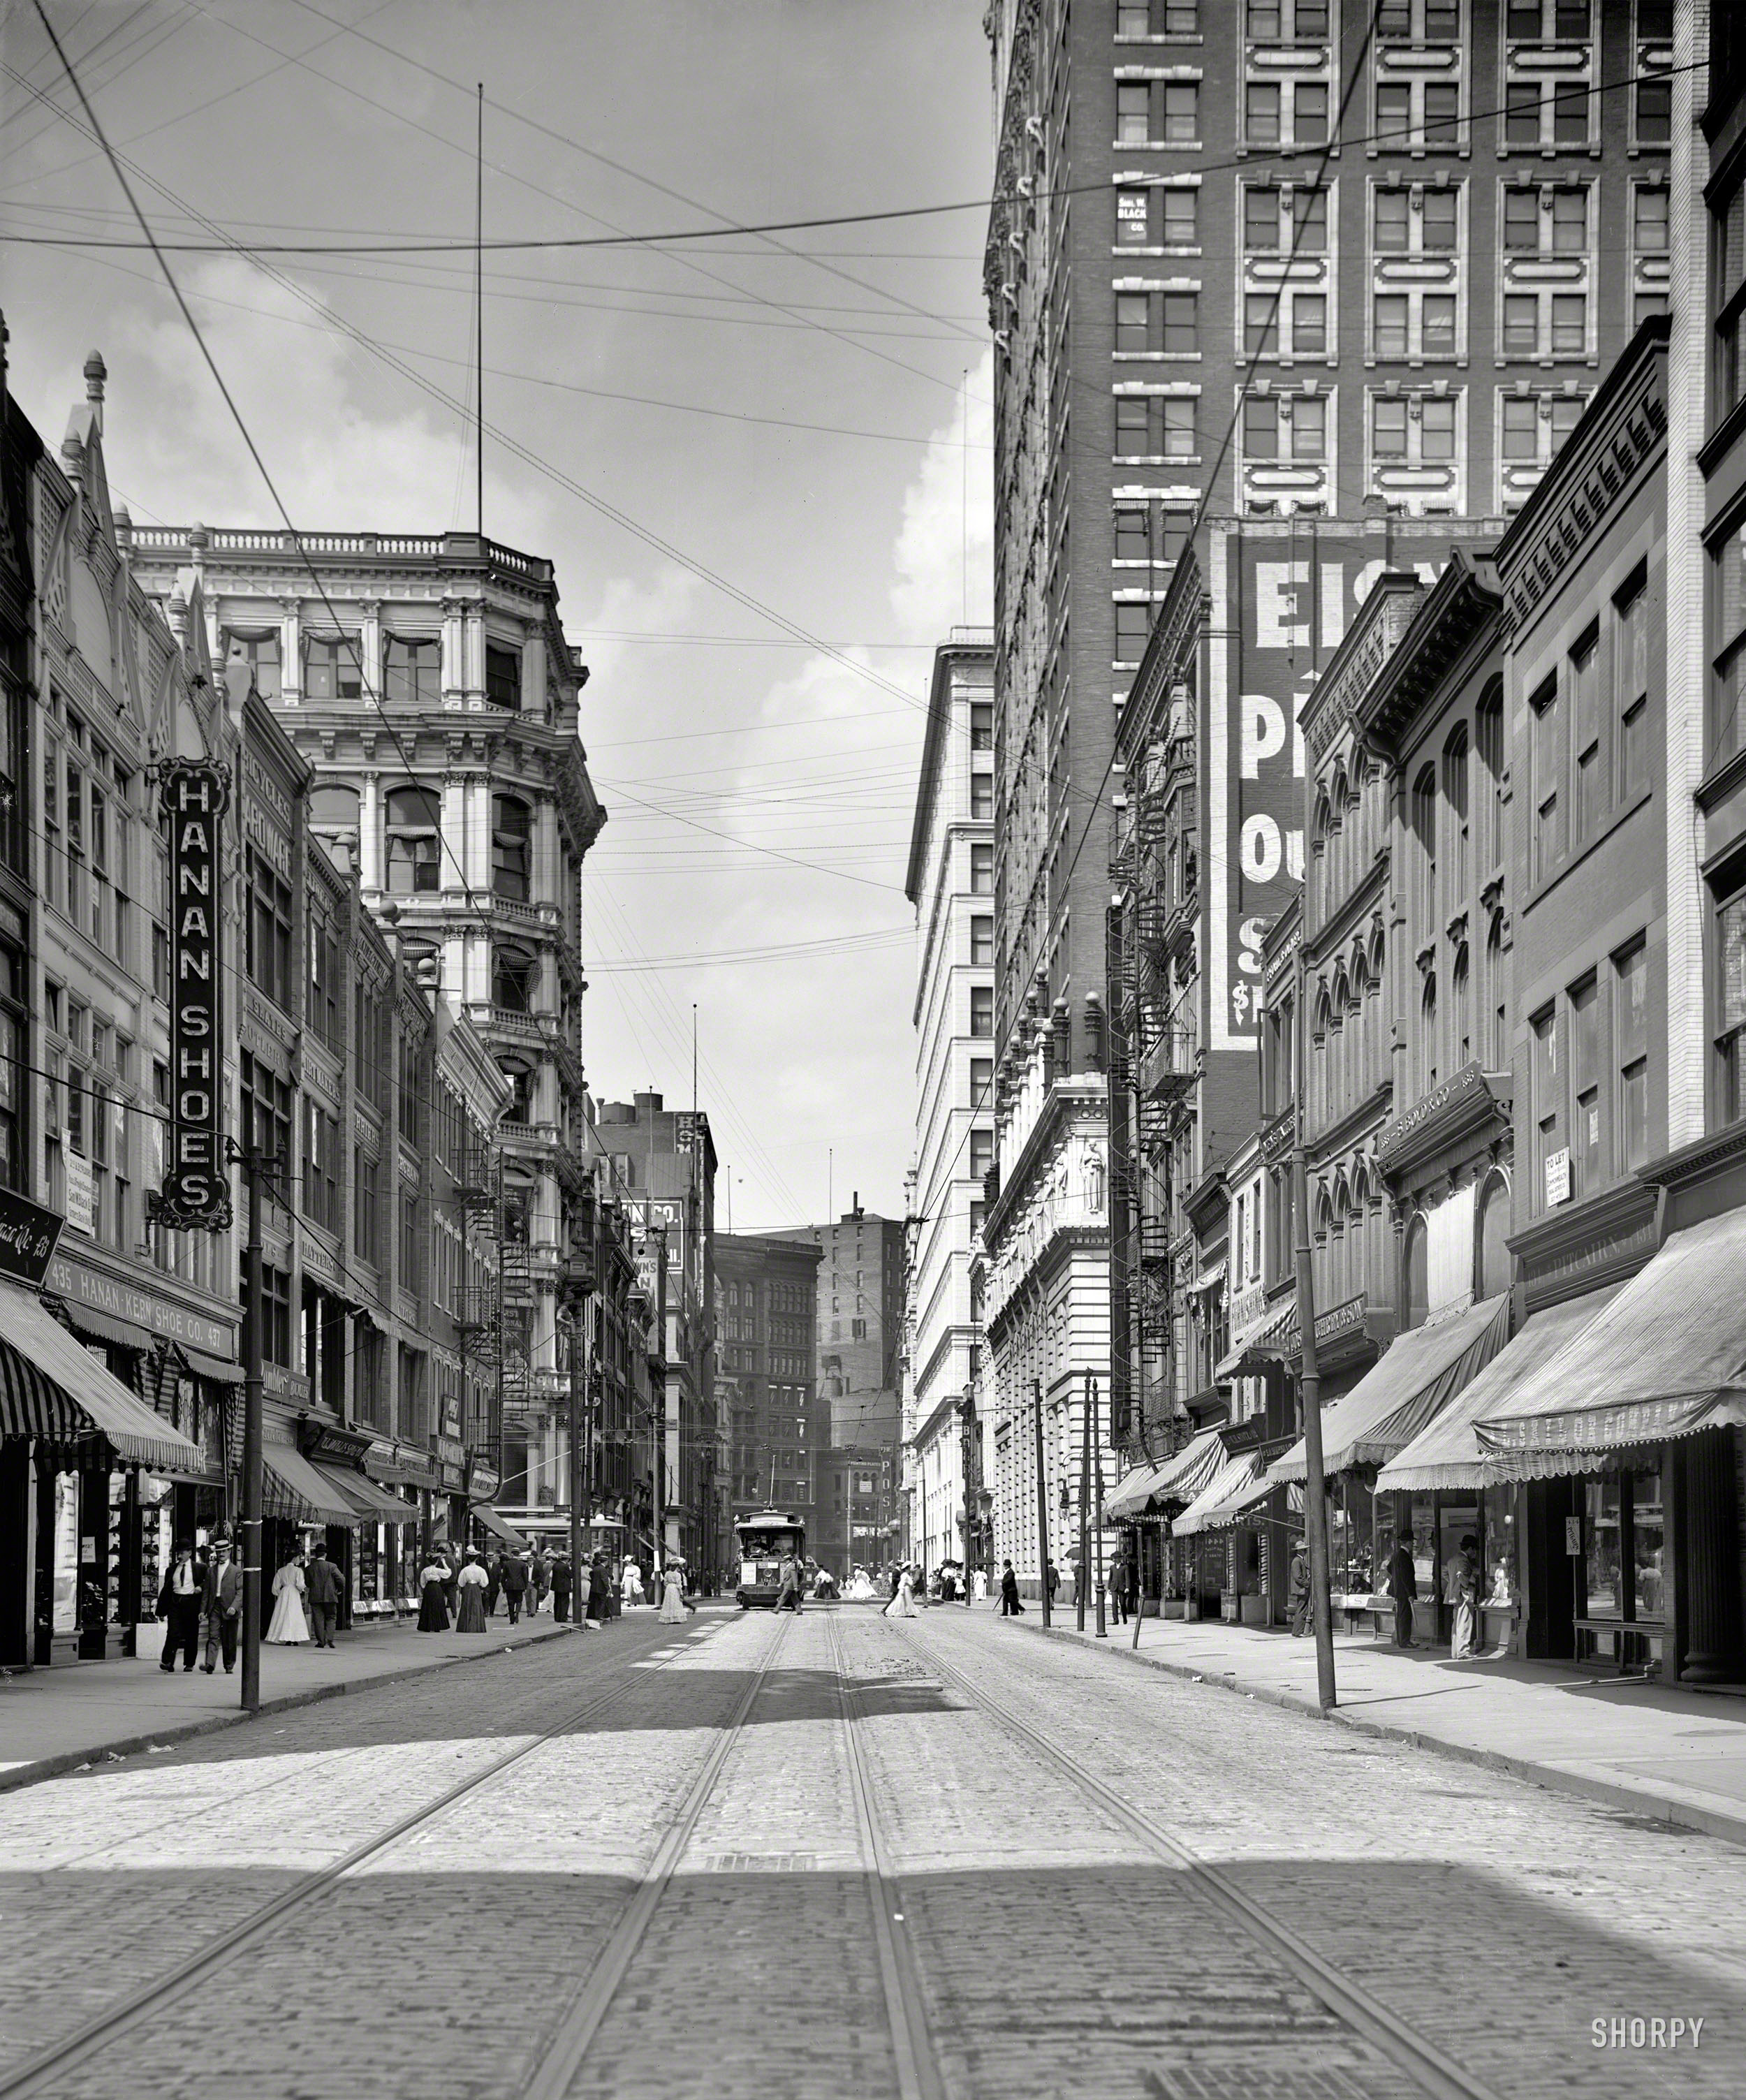 Circa 1905. "Wood Street, Pittsburg, Pa." Home to Hanan Shoes. 8x10 inch dry plate glass negative, Detroit Publishing Company. View full size.